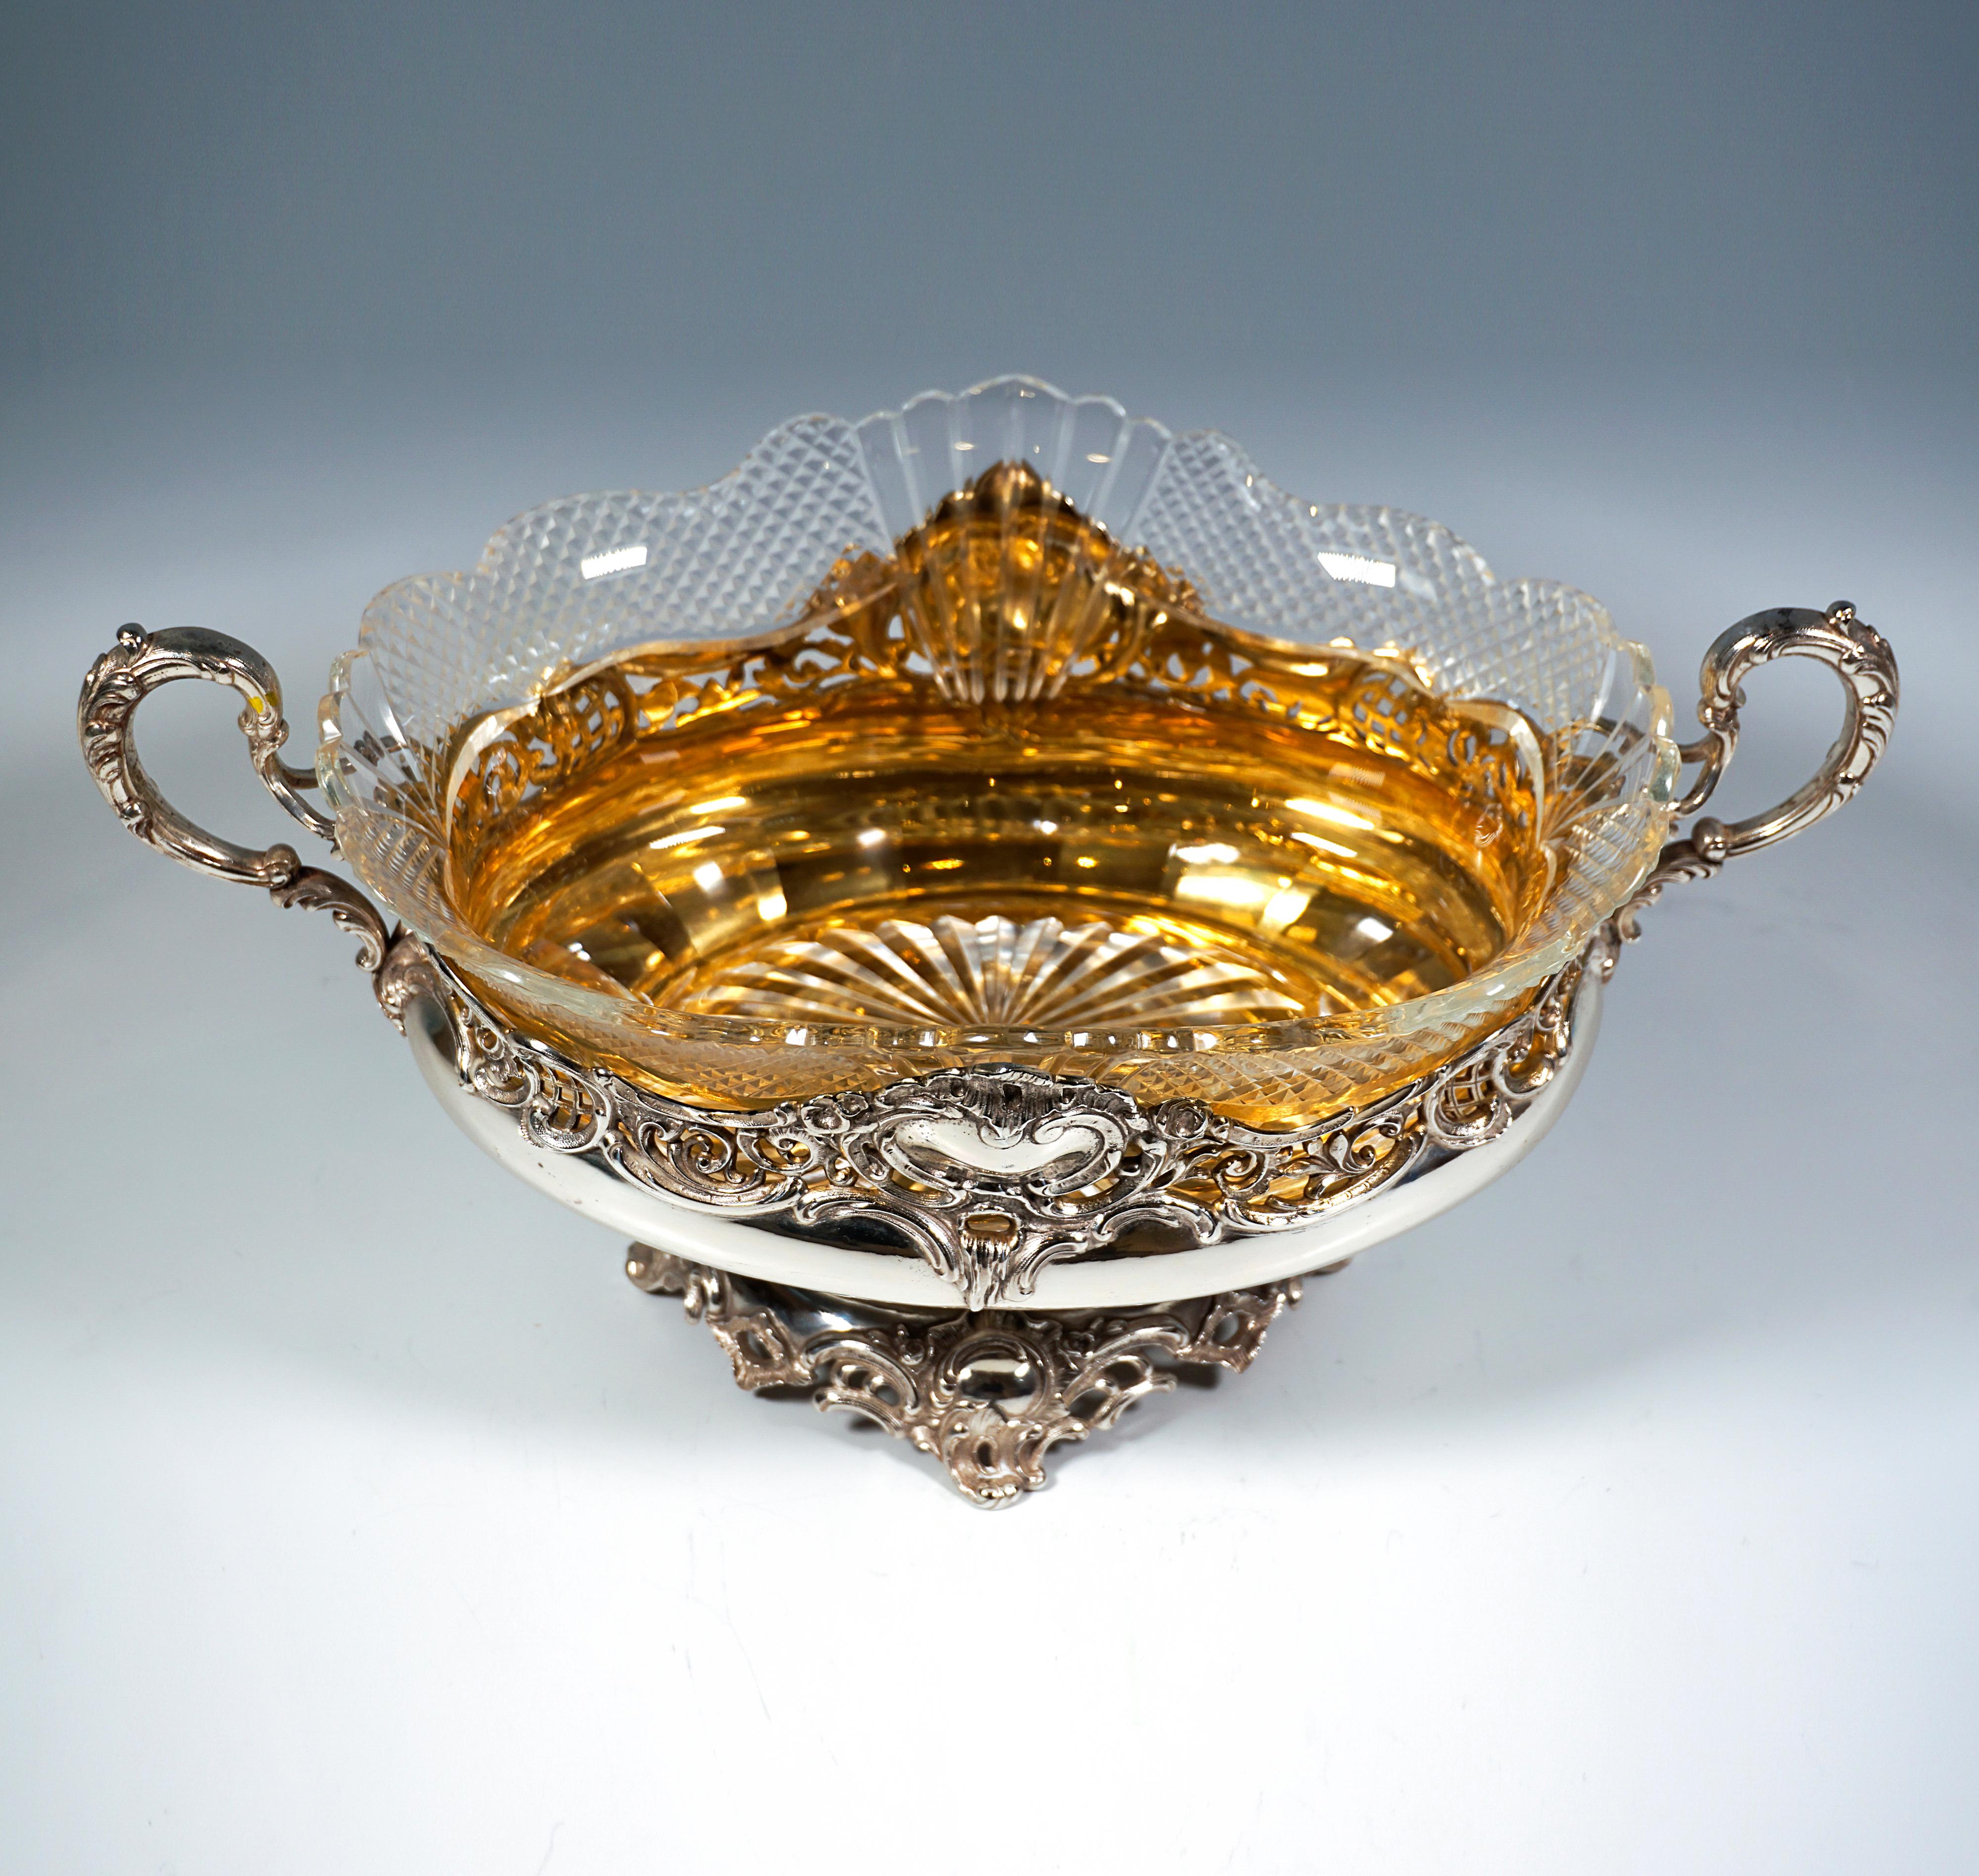 Rococo Revival Silver Jardiniere With Artfully Cut Glass Insert, Wilkens & Sons Germany, 1894 For Sale